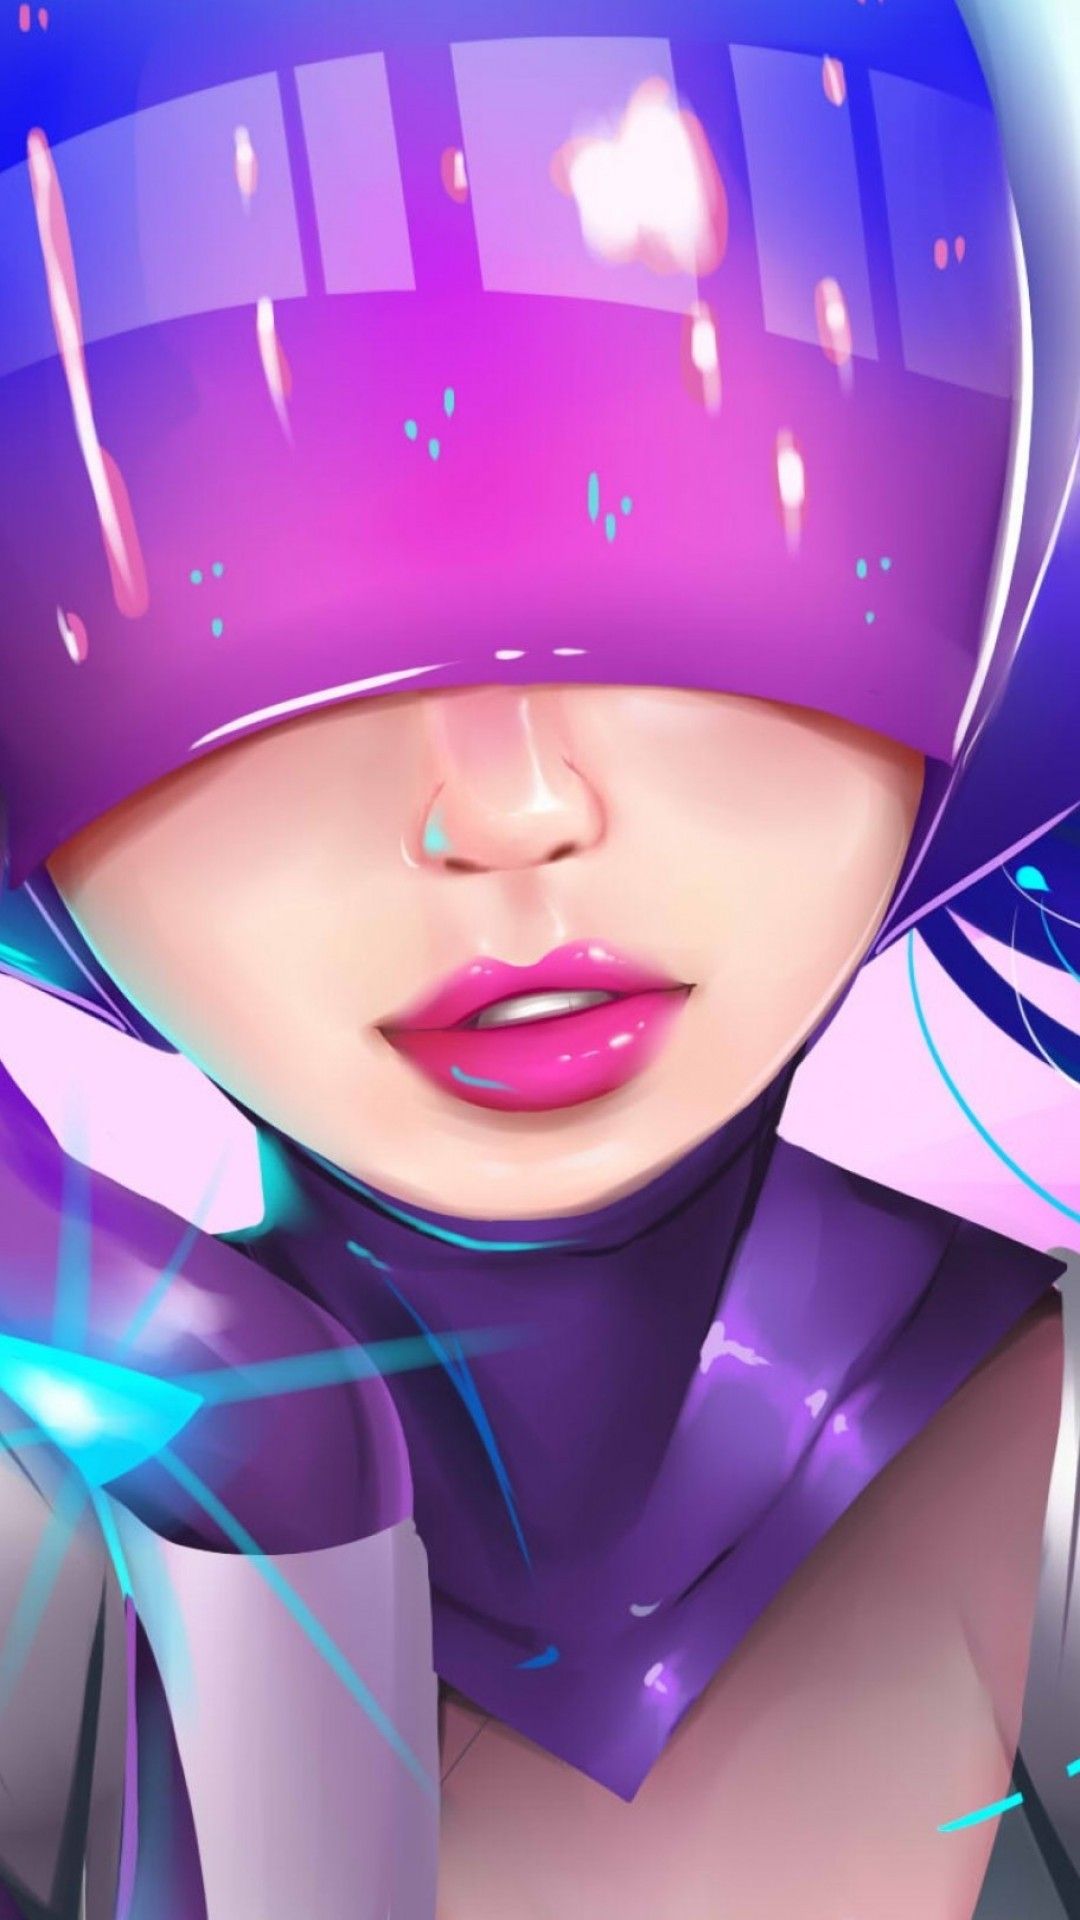 Download 1080x1920 Dj Sona, League Of Legends, Helmet, Headphone, Artwork Wallpaper for iPhone iPhone 7 Plus, iPhone 6+, Sony Xperia Z, HTC One